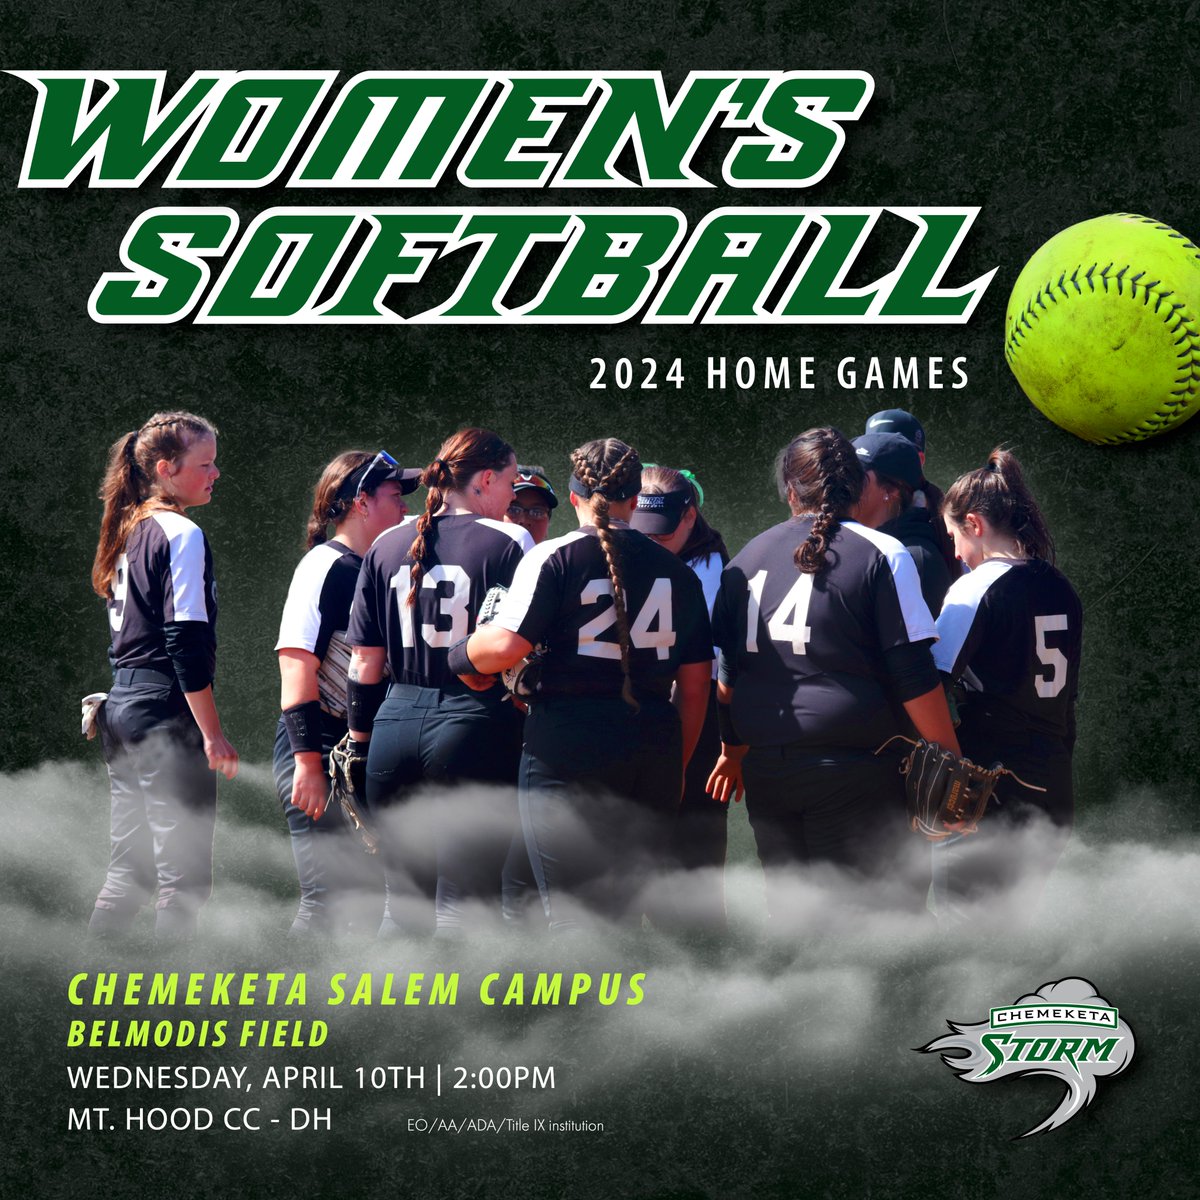 The Chemeketa Storm women's softball team plays today at home! The doubleheader against Mt. Hood Community College starts at 2 pm! 🌩️🥎 #StormLife